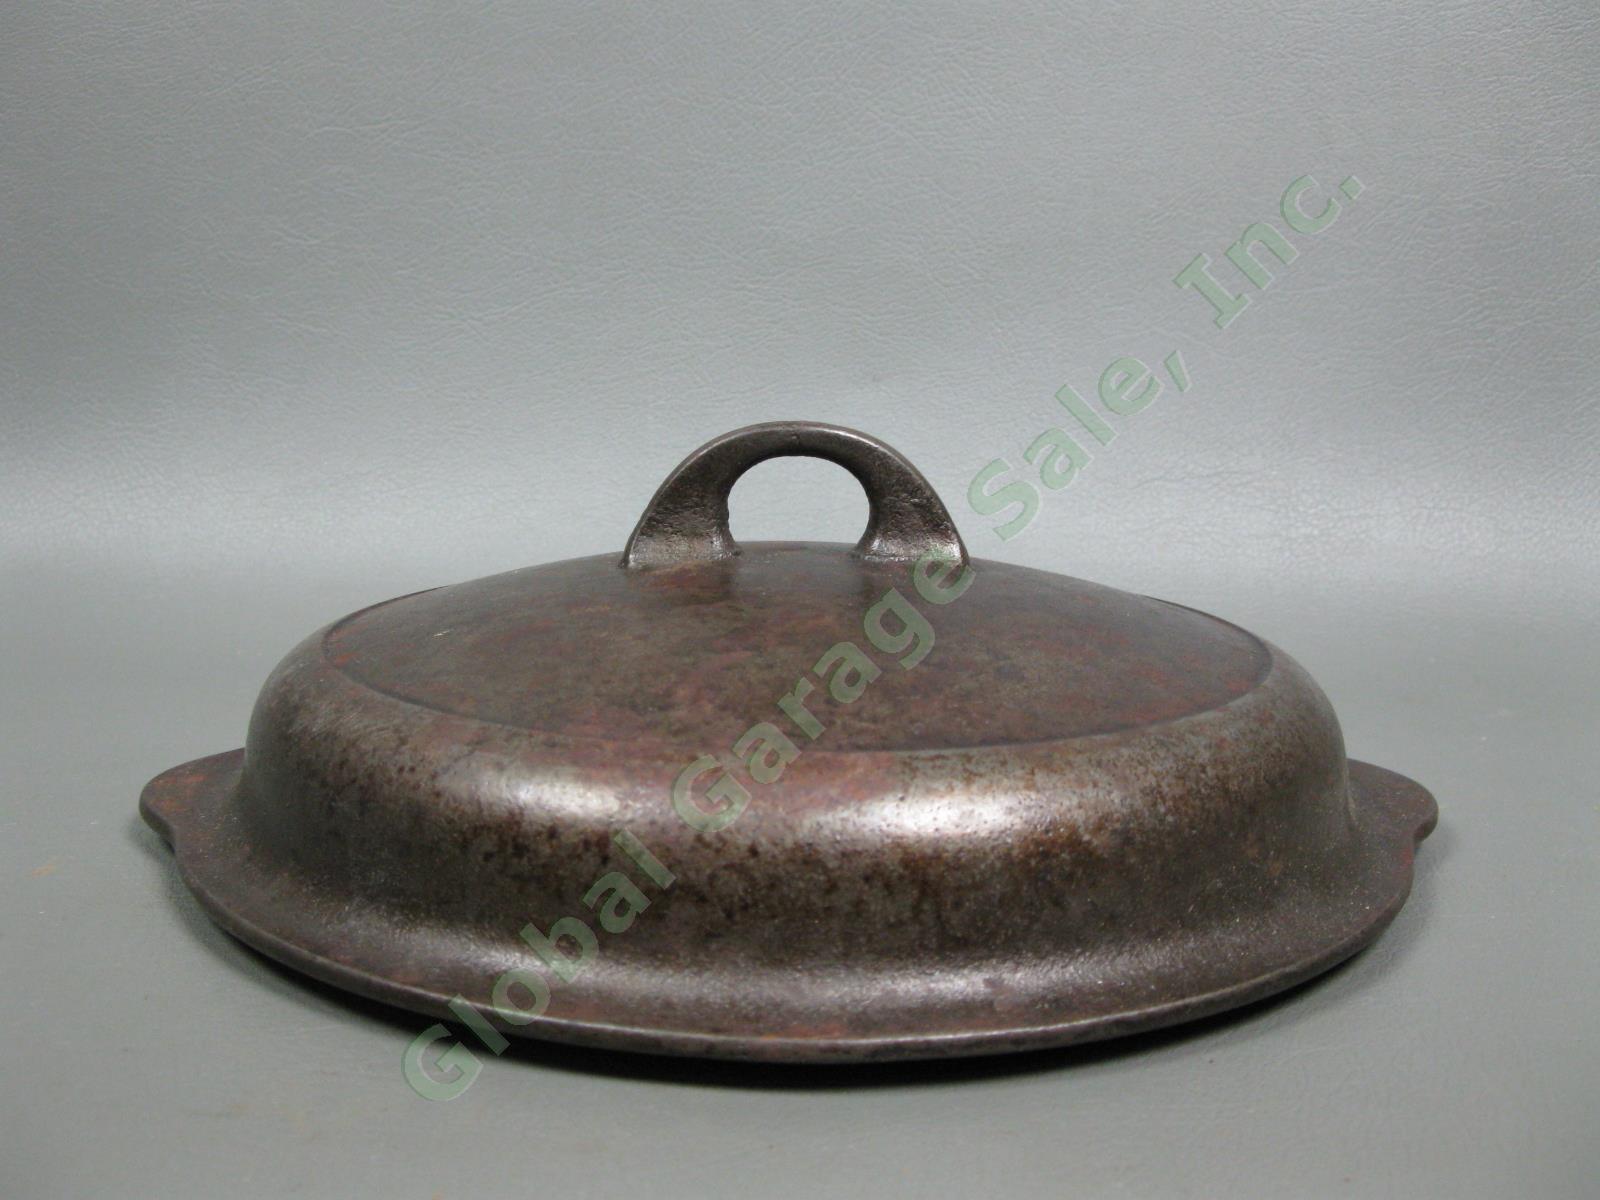 Vintage Griswold No-5 1095 Cast Iron Self-Basting Dutch Oven Lid Cover Cookware 4